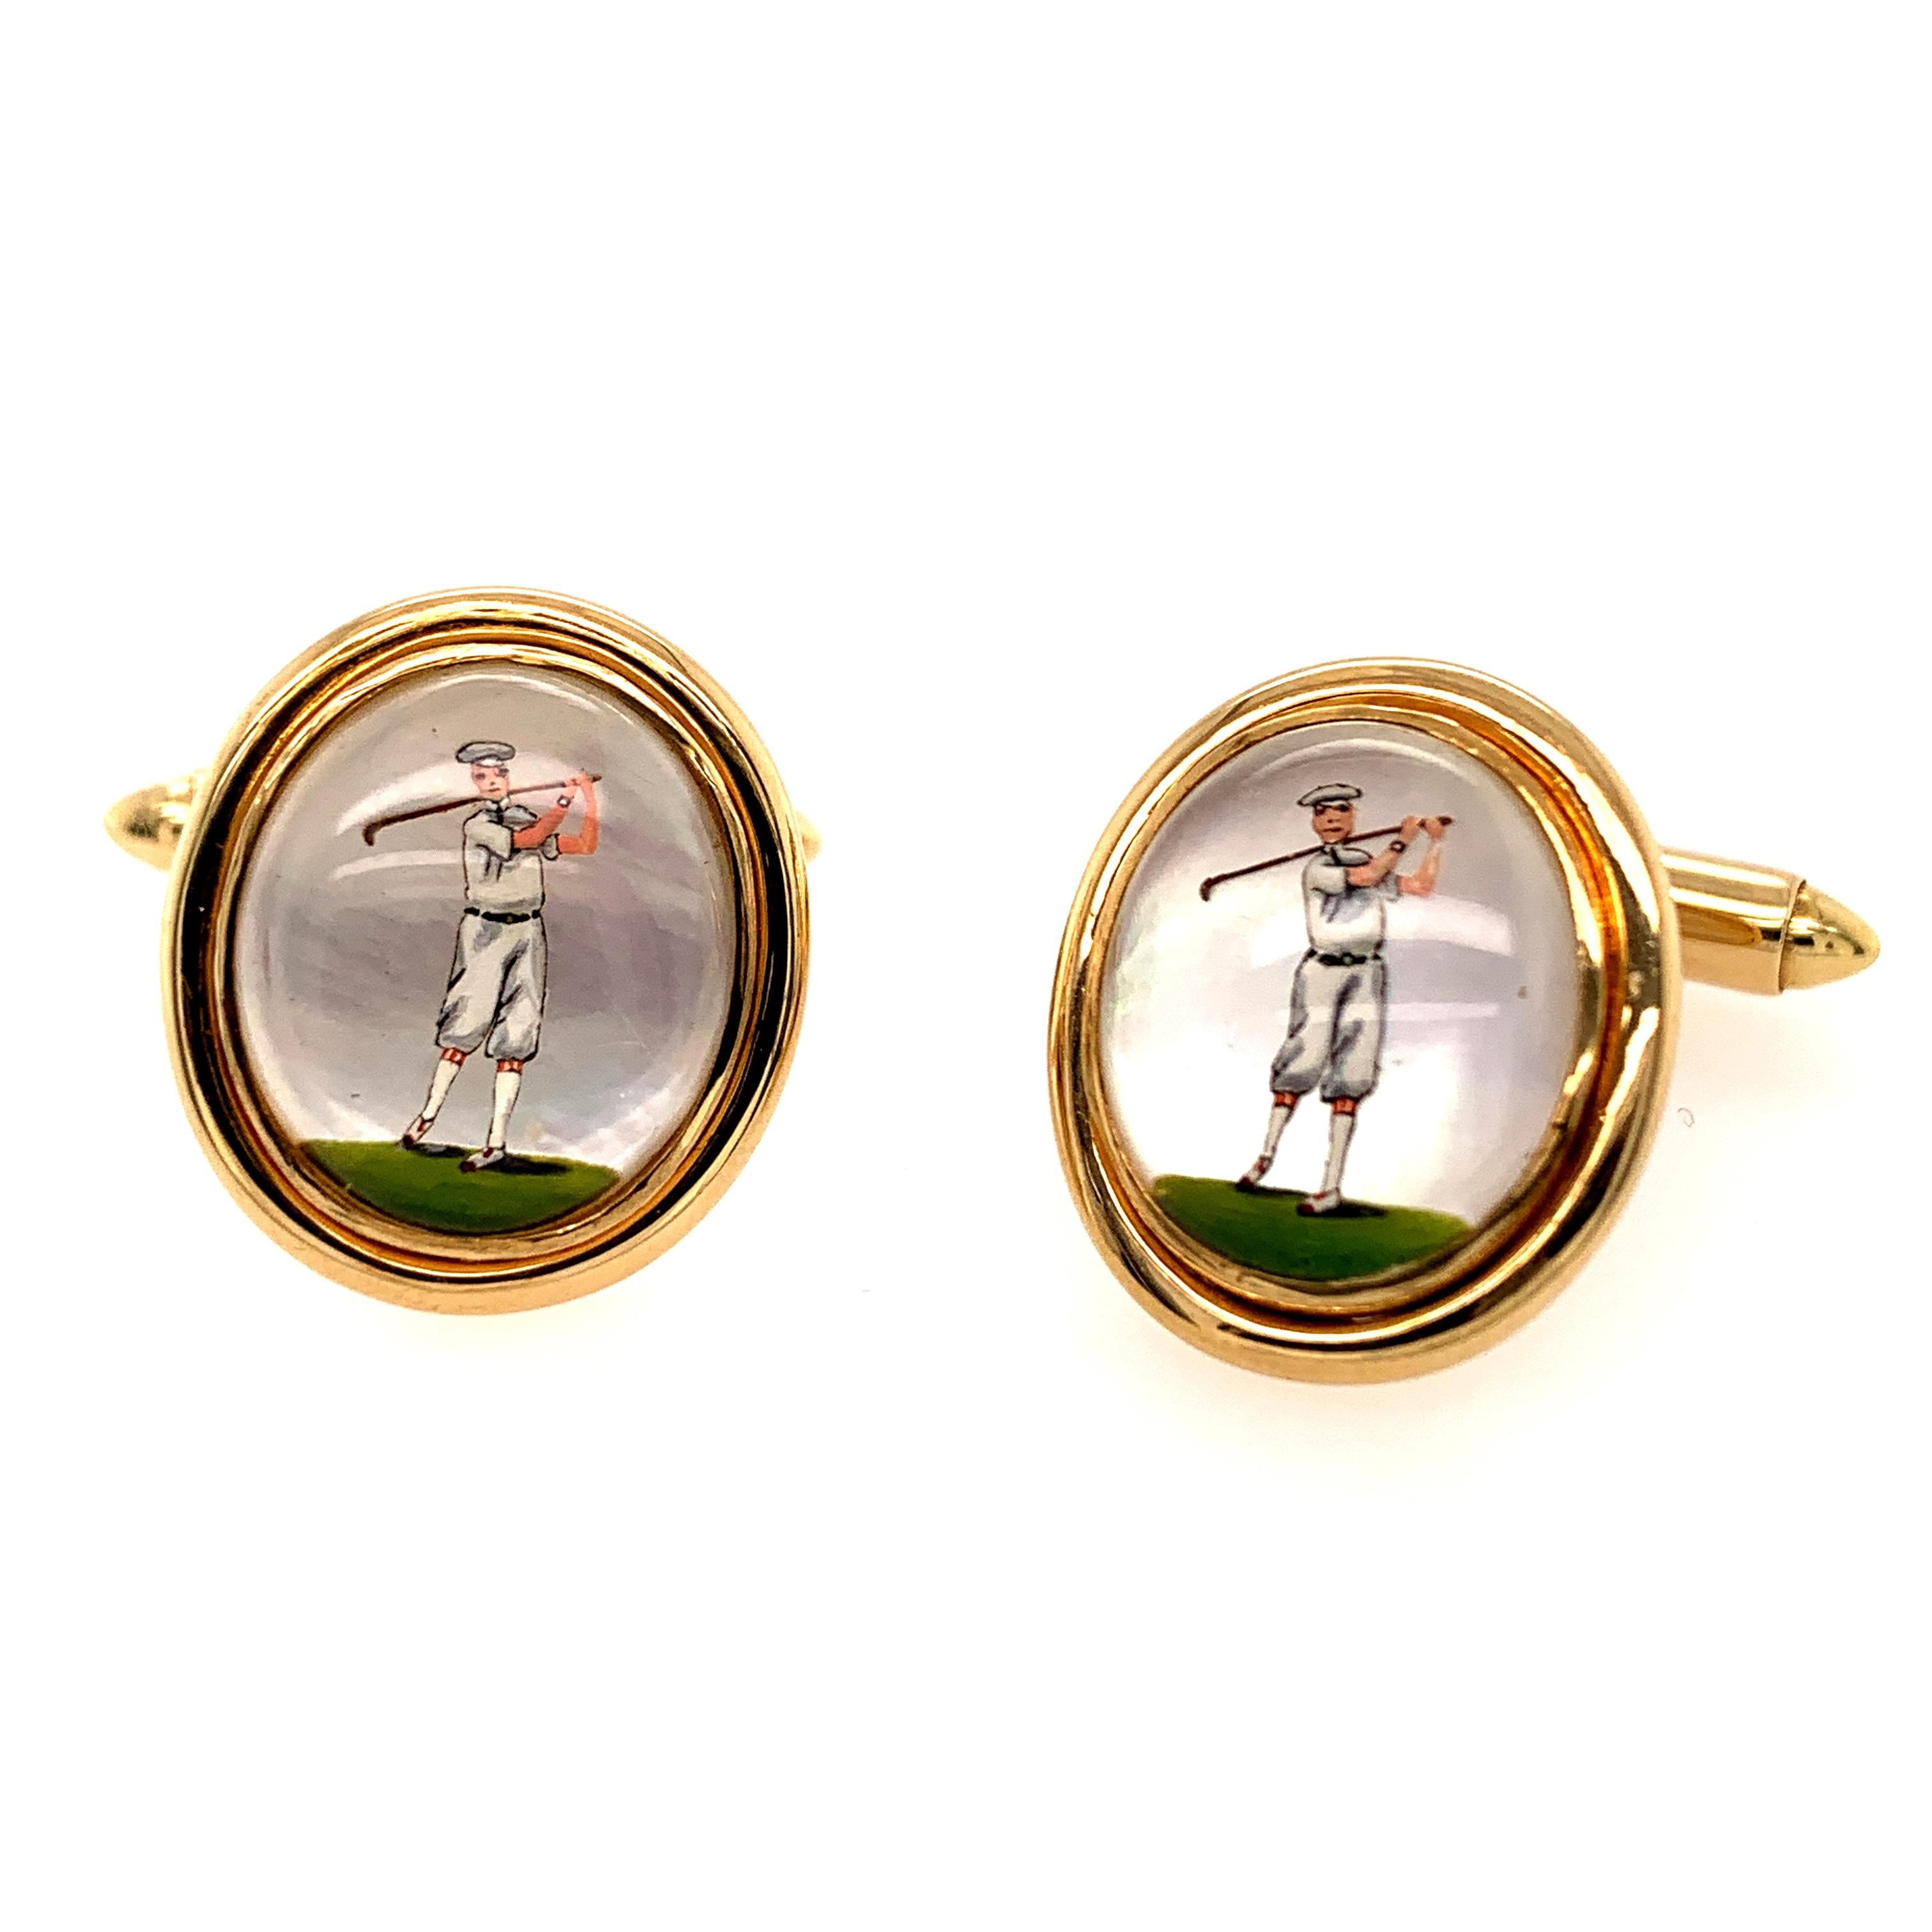 Distinctive reverse crystal cufflinks, depicting a golfer dressed in vintage clothes, swinging a golf club.  Set in 18K yellow gold.  3/4